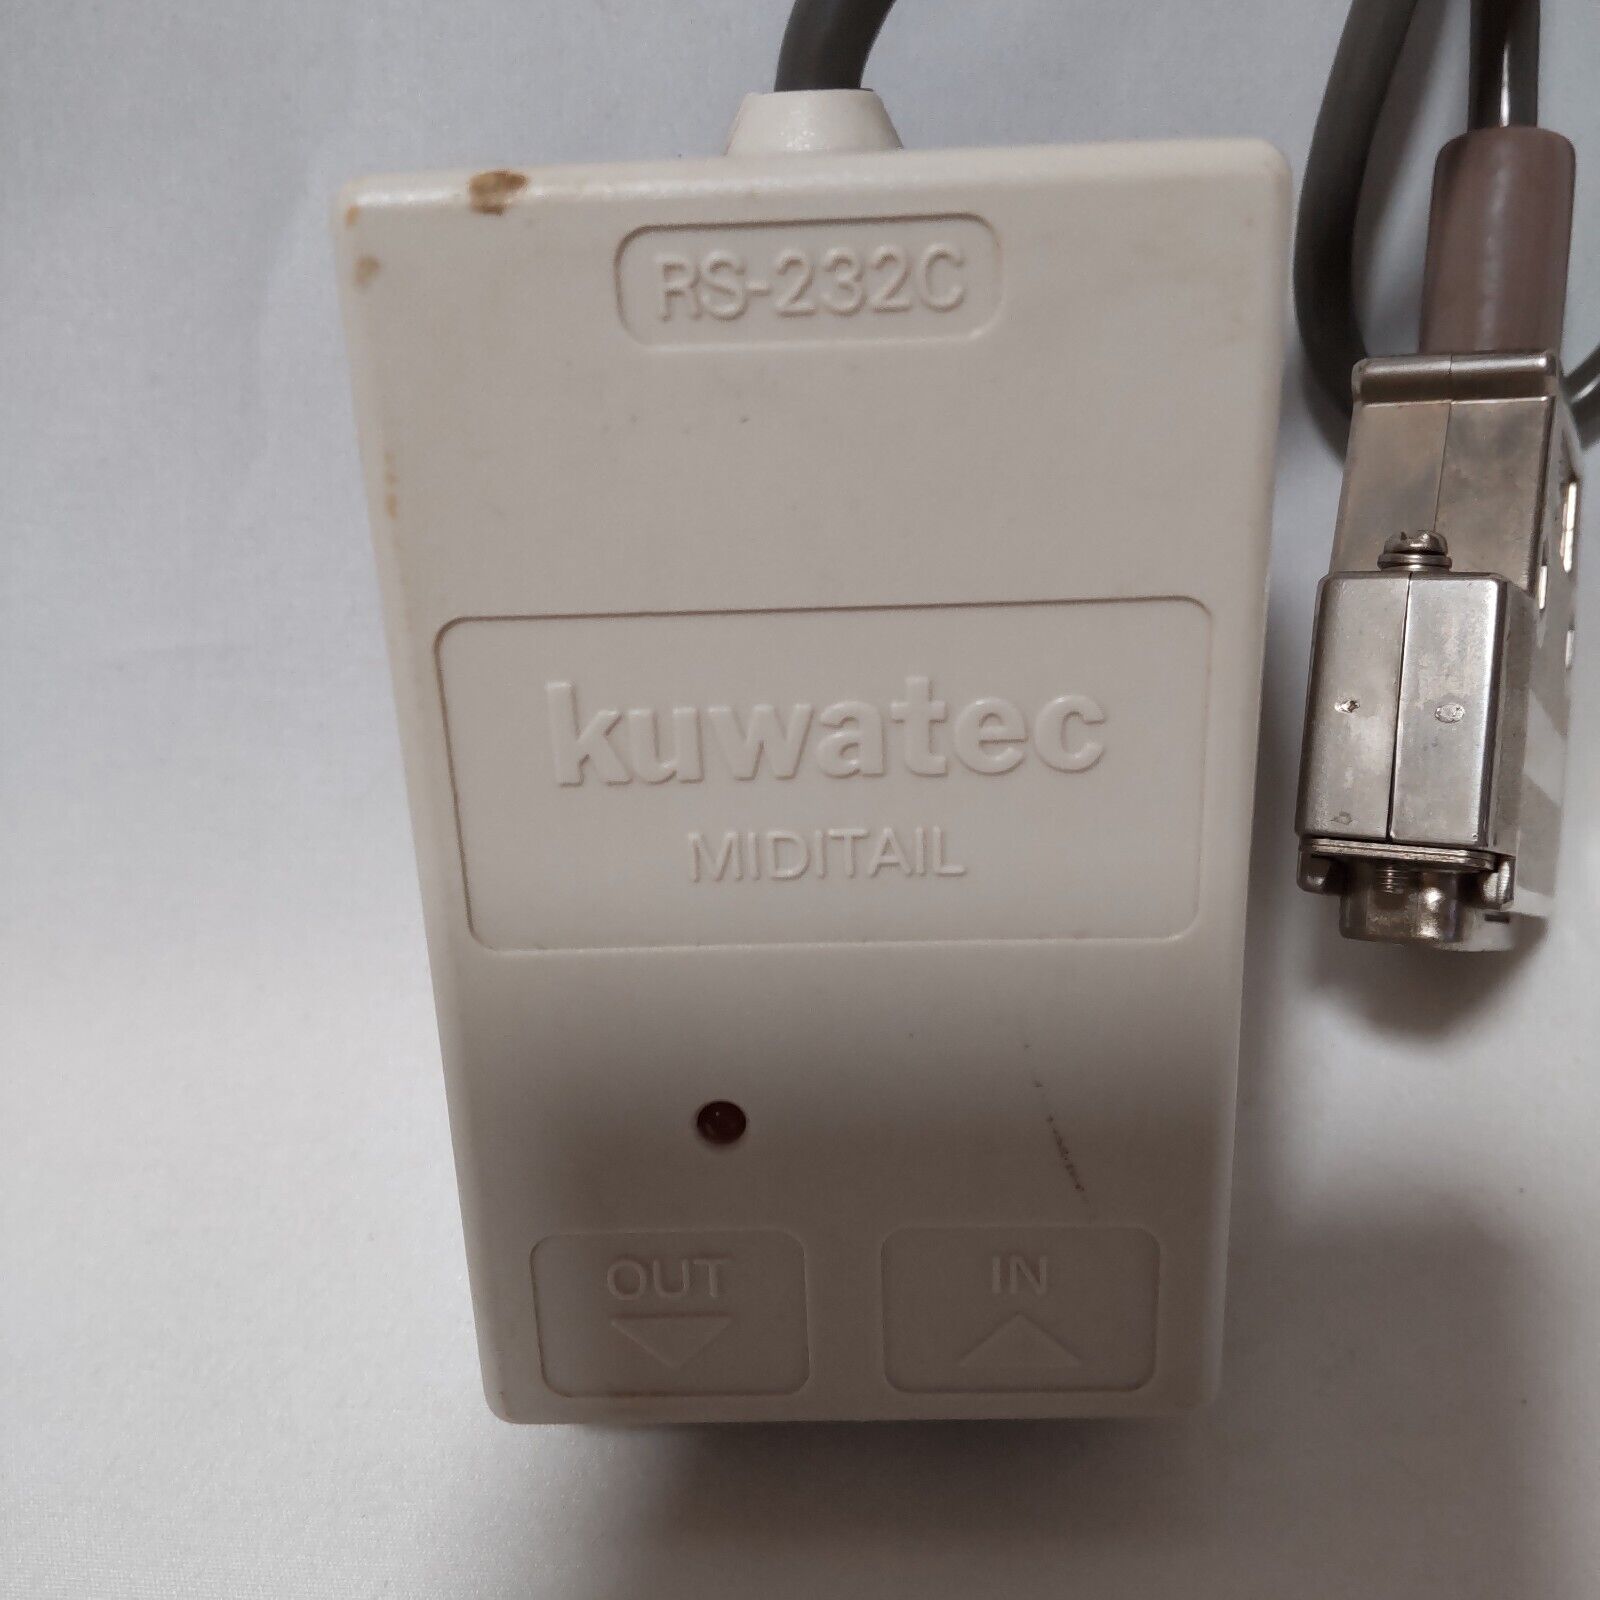 Kuwatec MIDITAIL / RS-232C - A Highly Sought-After MIDI Cable/very rare/Japan